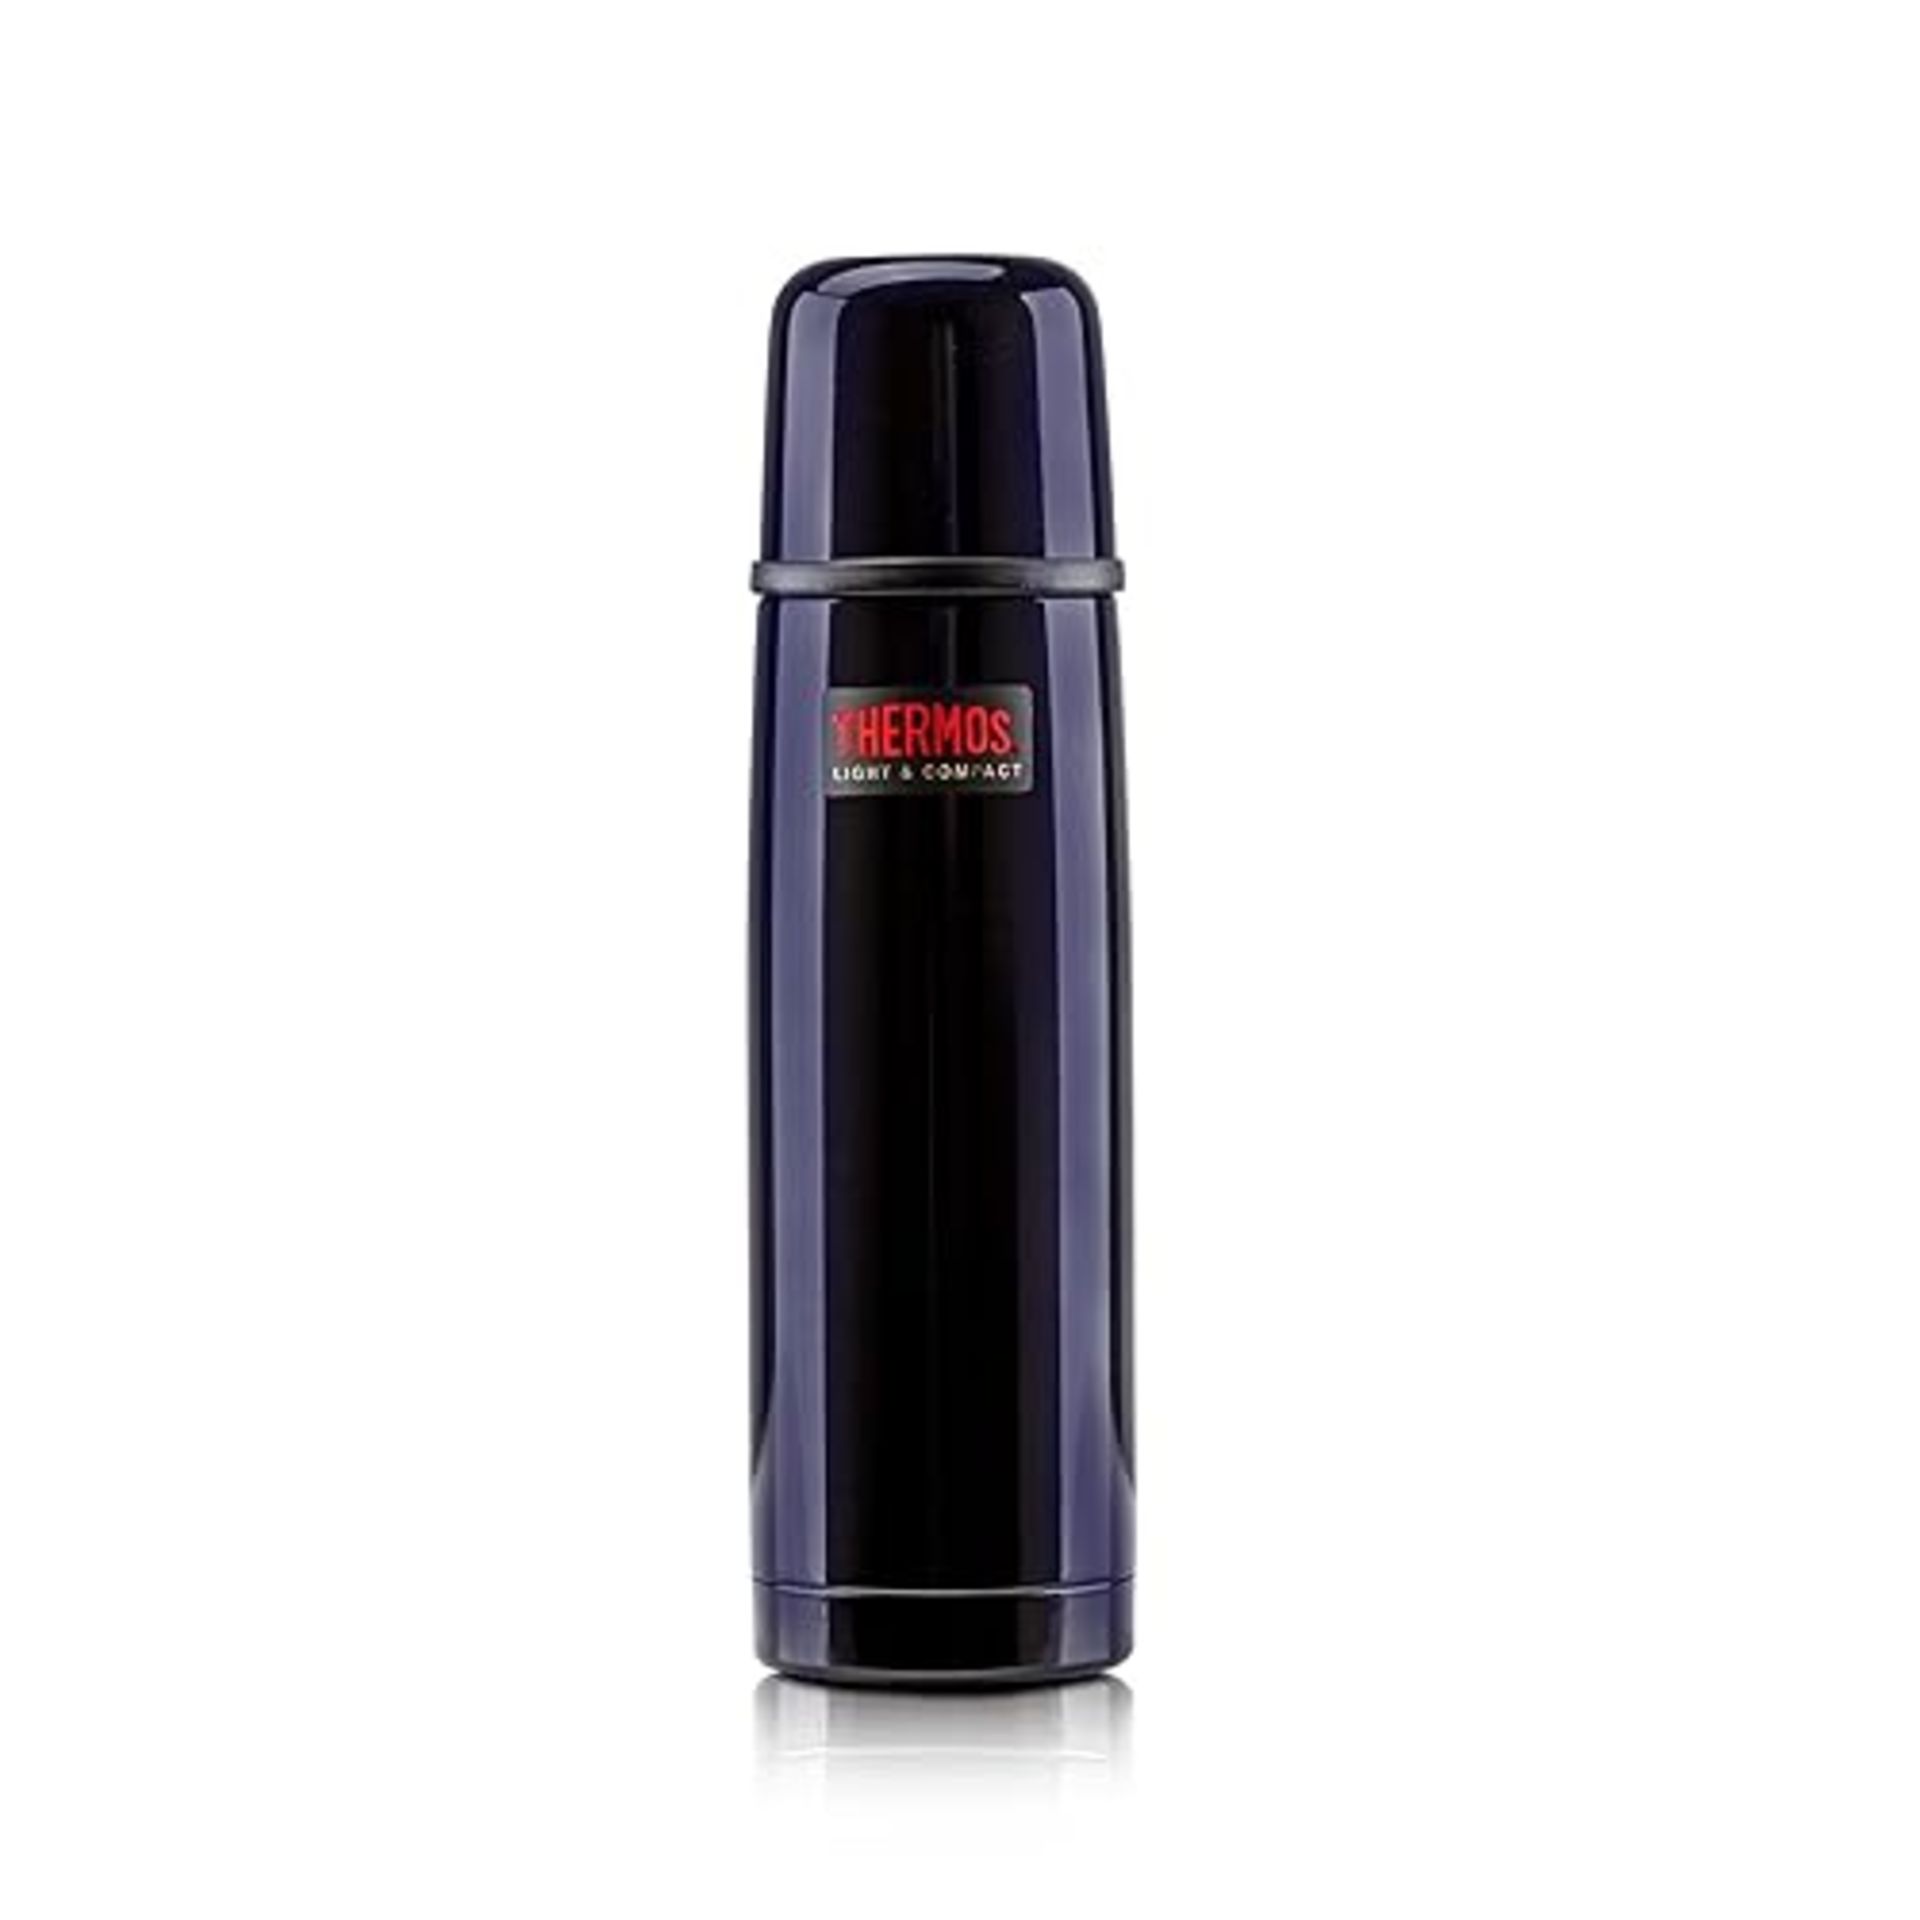 Thermos 185515 Light and Compact Flask, Midnight Blue, 1L